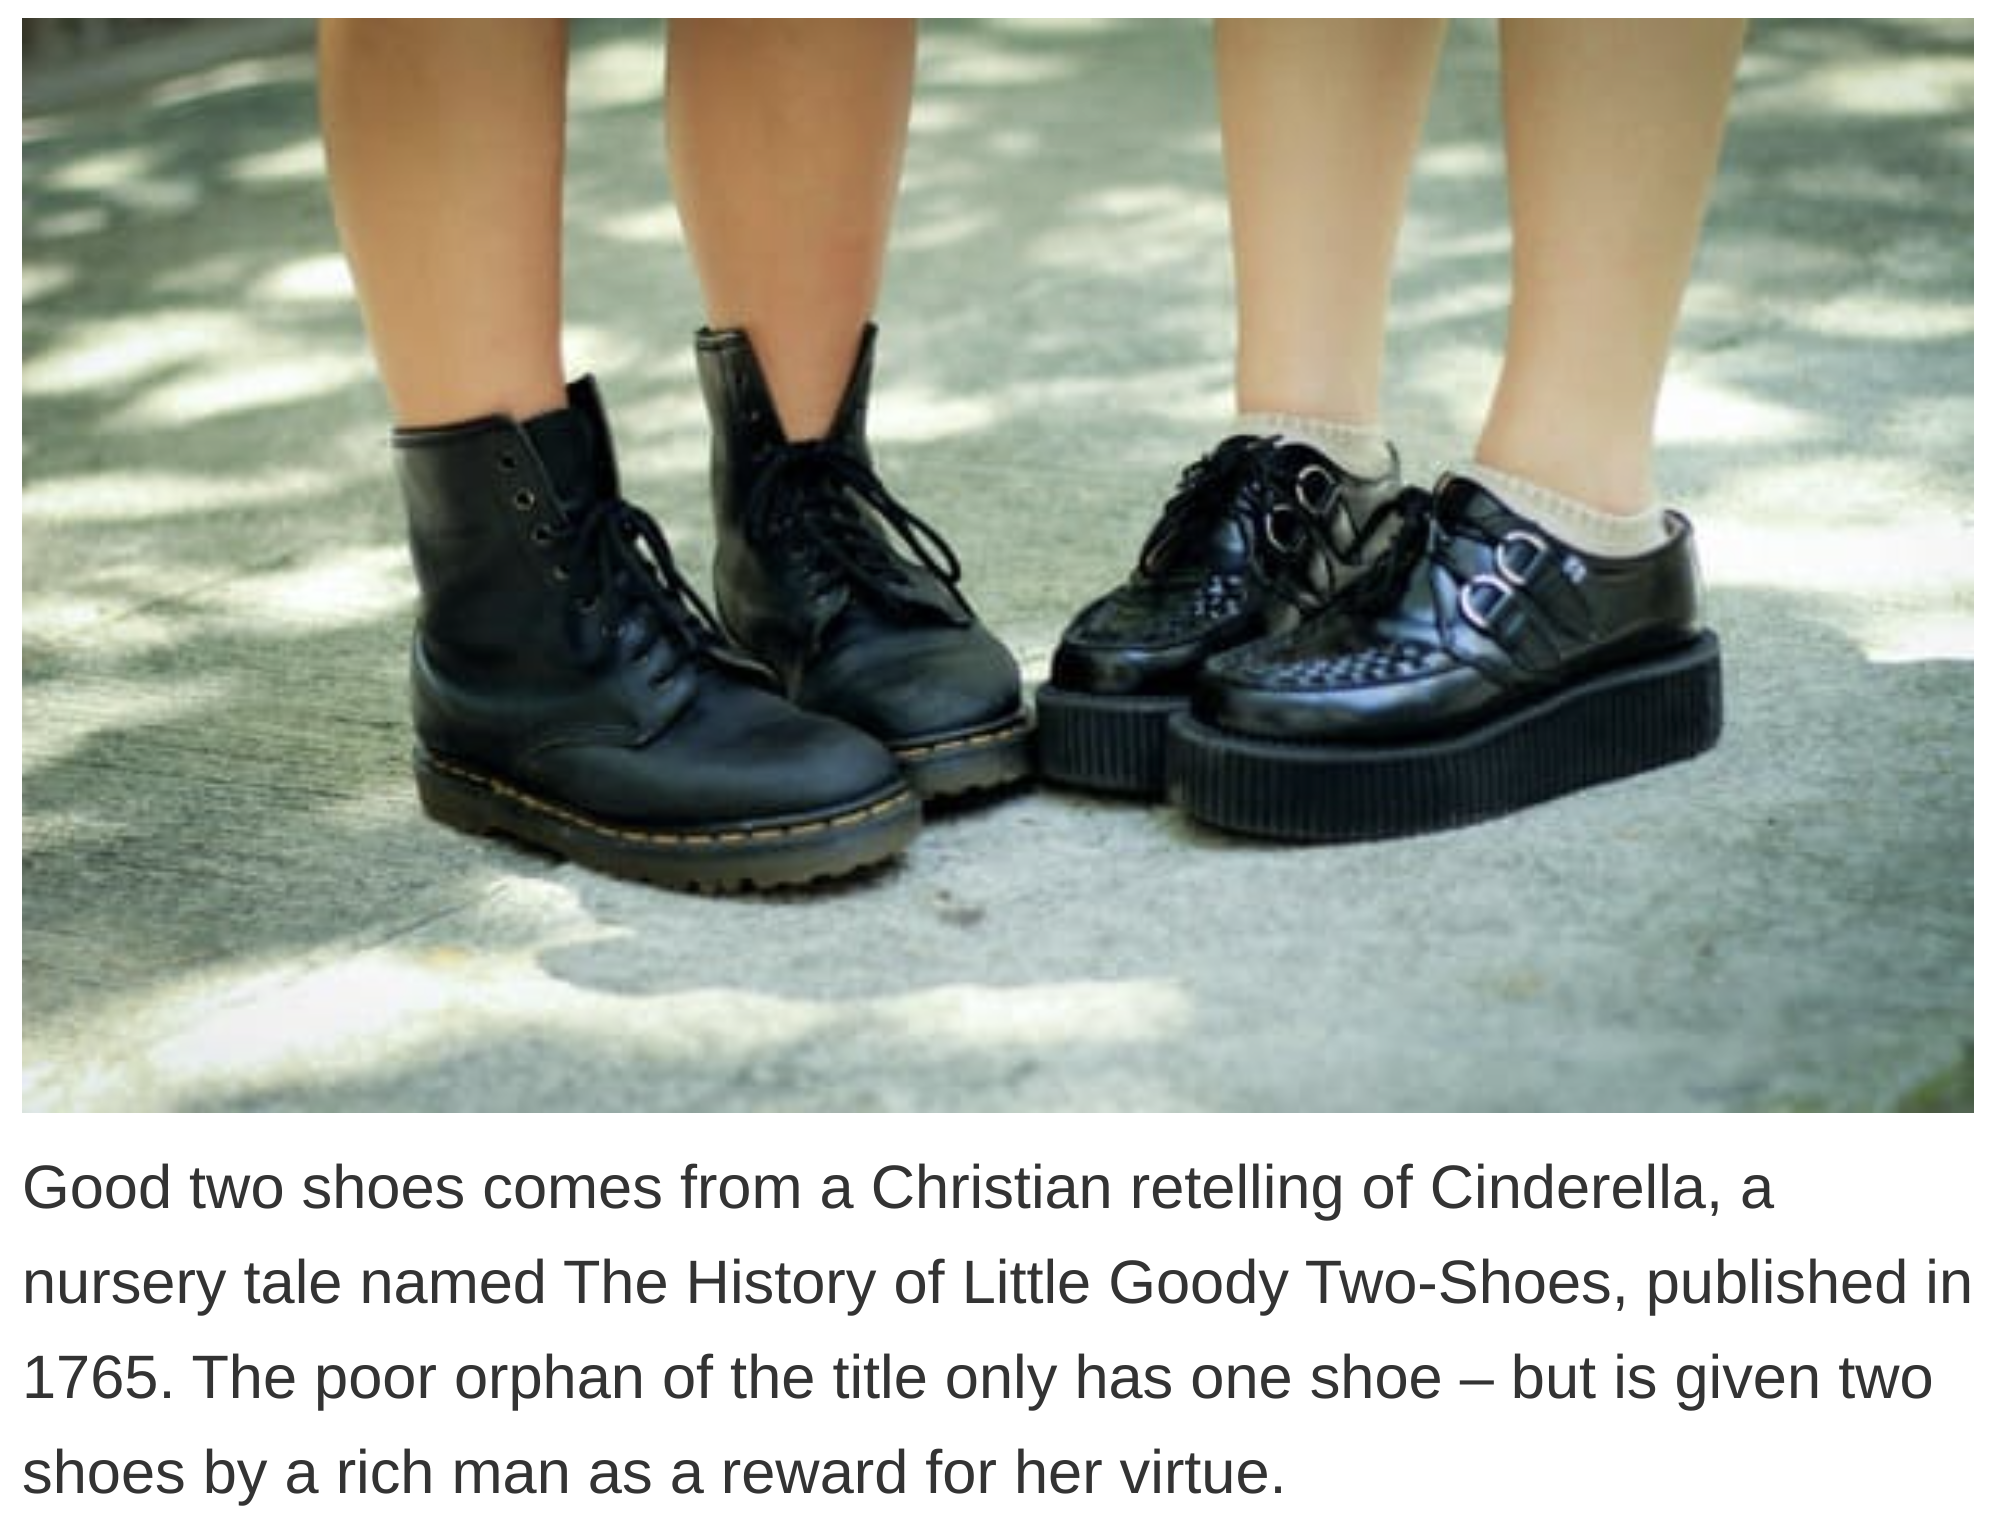 etymology english language - Goody two shoes comes from a Christian retelling of Cinderella, a nursery tale named The History of Little Goody TwoShoes, published in 1765. The poor orphan of the title only has one shoe but is given two shoes by a rich man 